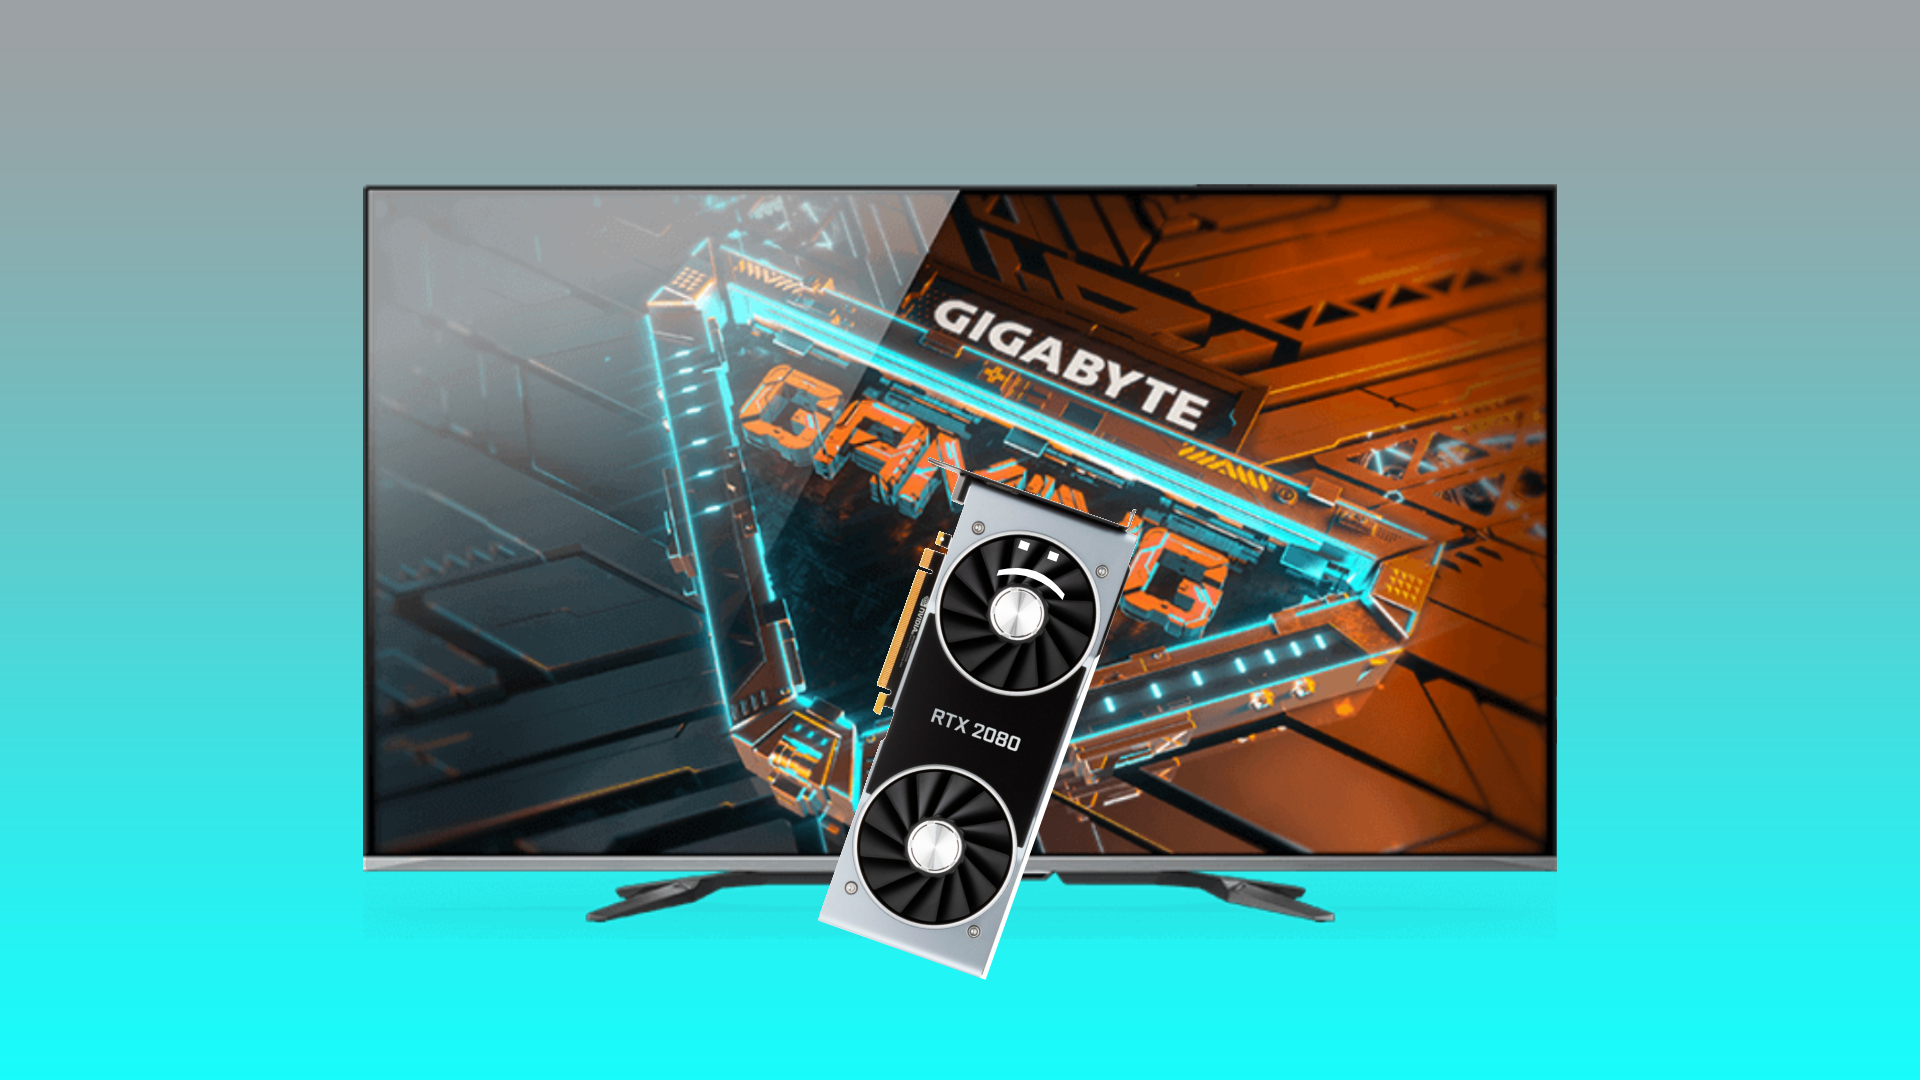 Gigabyte has a new gaming monitor your GPU might struggle with